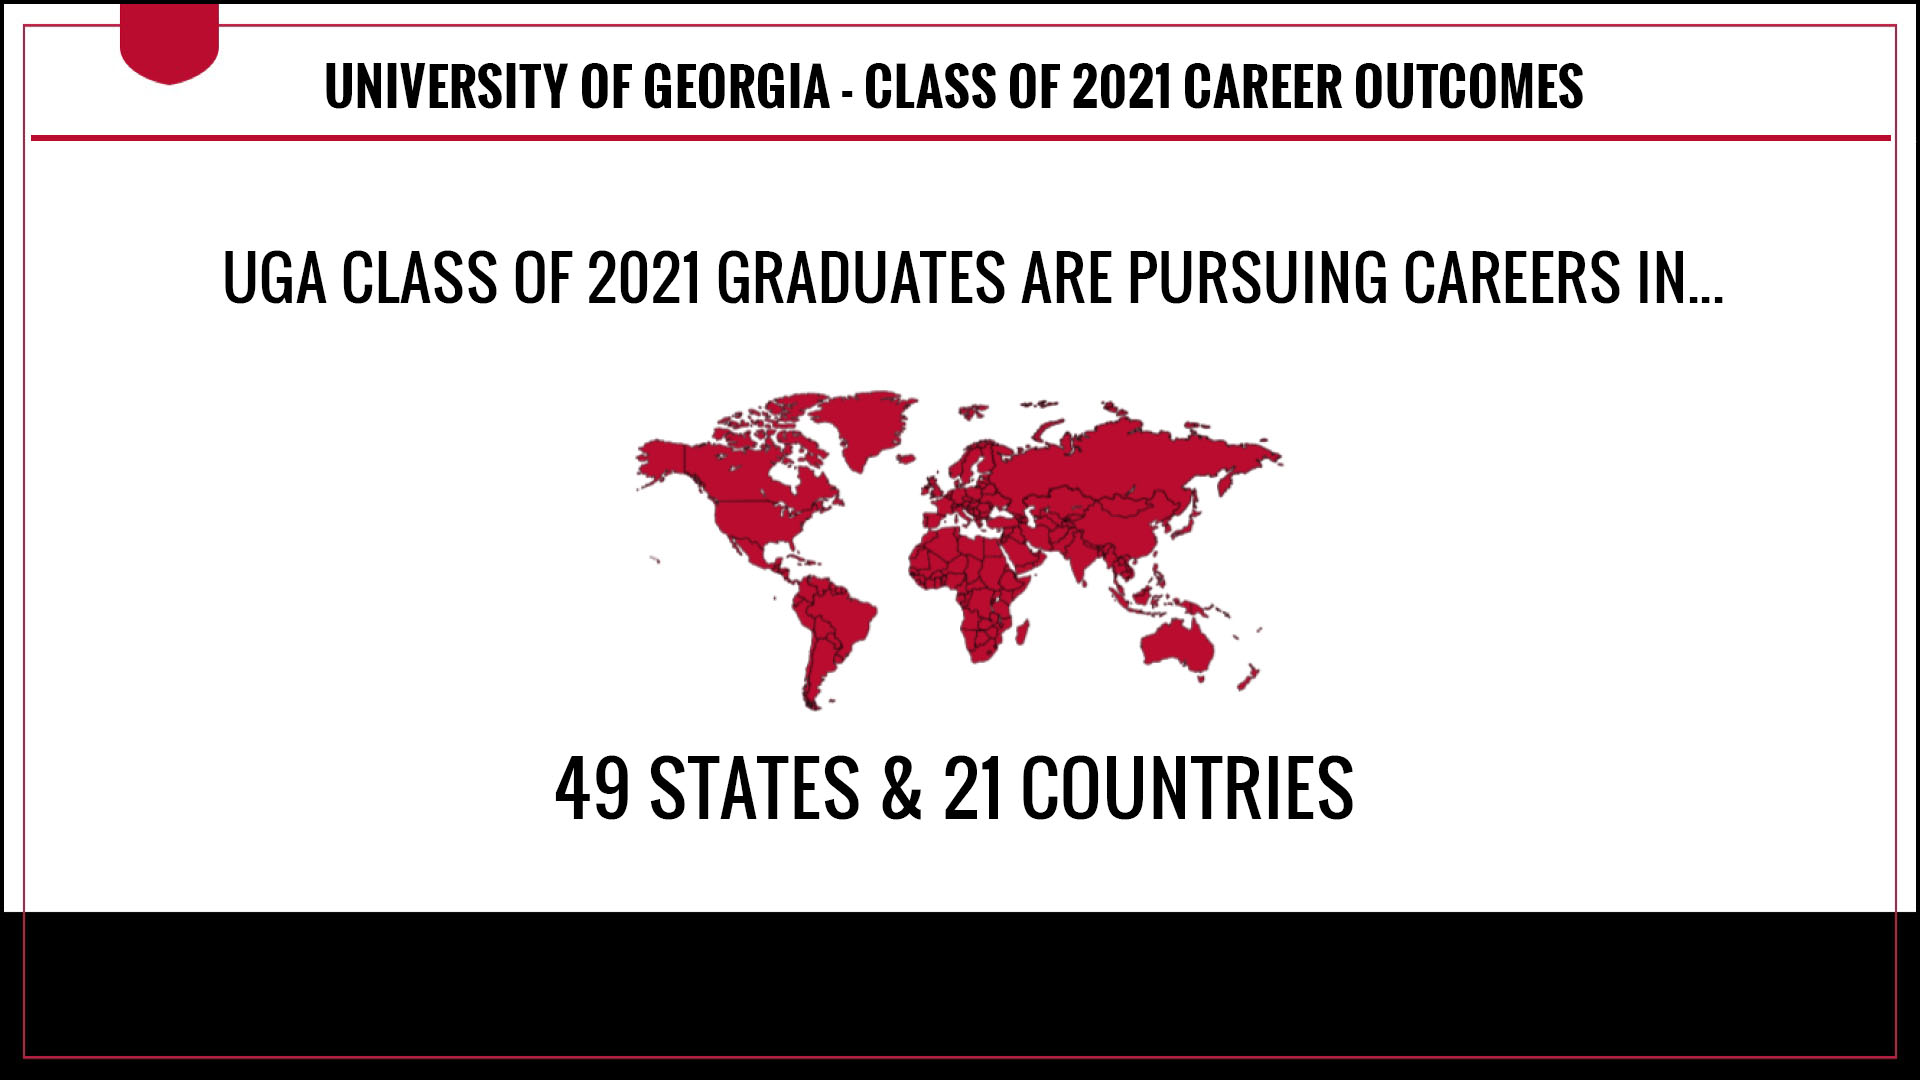 UGA CLASS OF 2021 GRADUATES ARE PURSUING CAREERS IN 49 STATES AND 21 COUNTRIES